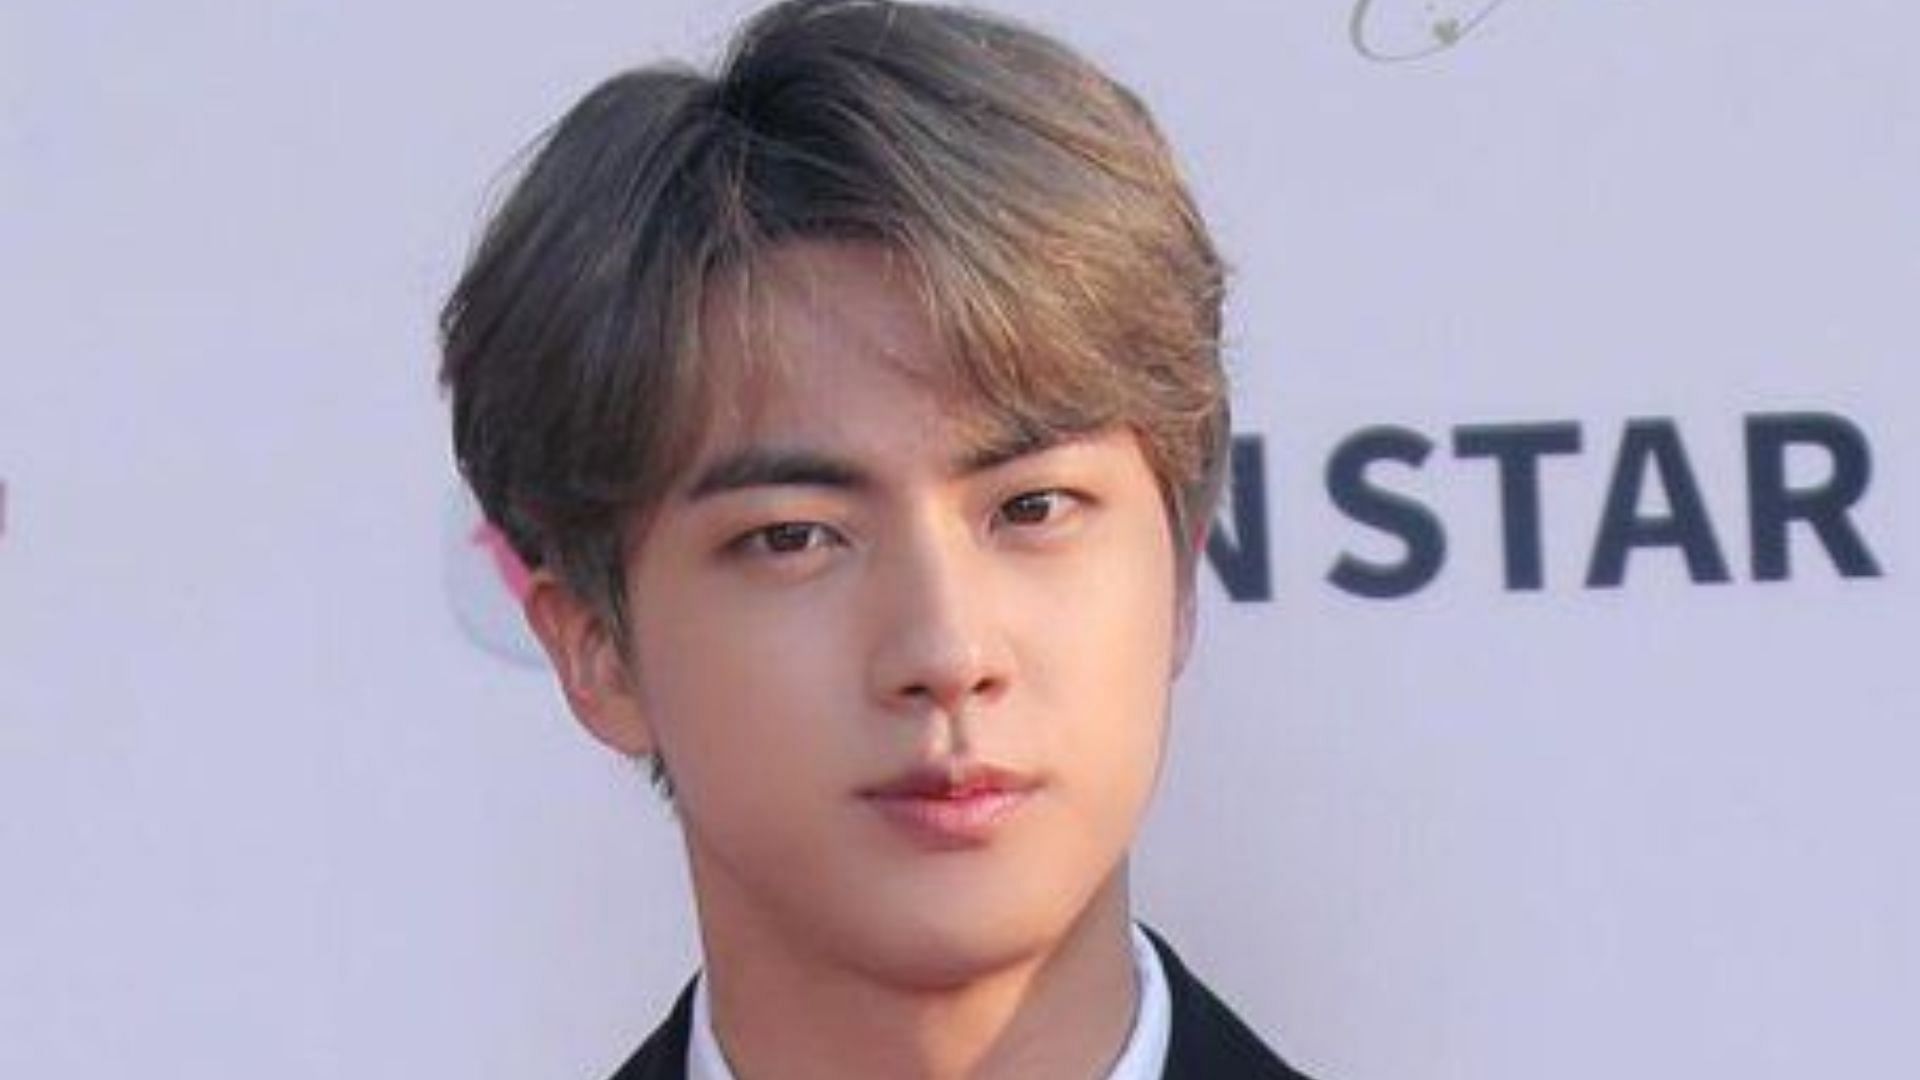 Confirmed”: Microsoft claimed to be BTS' Jin stan account and fans are  praising the star's global influence